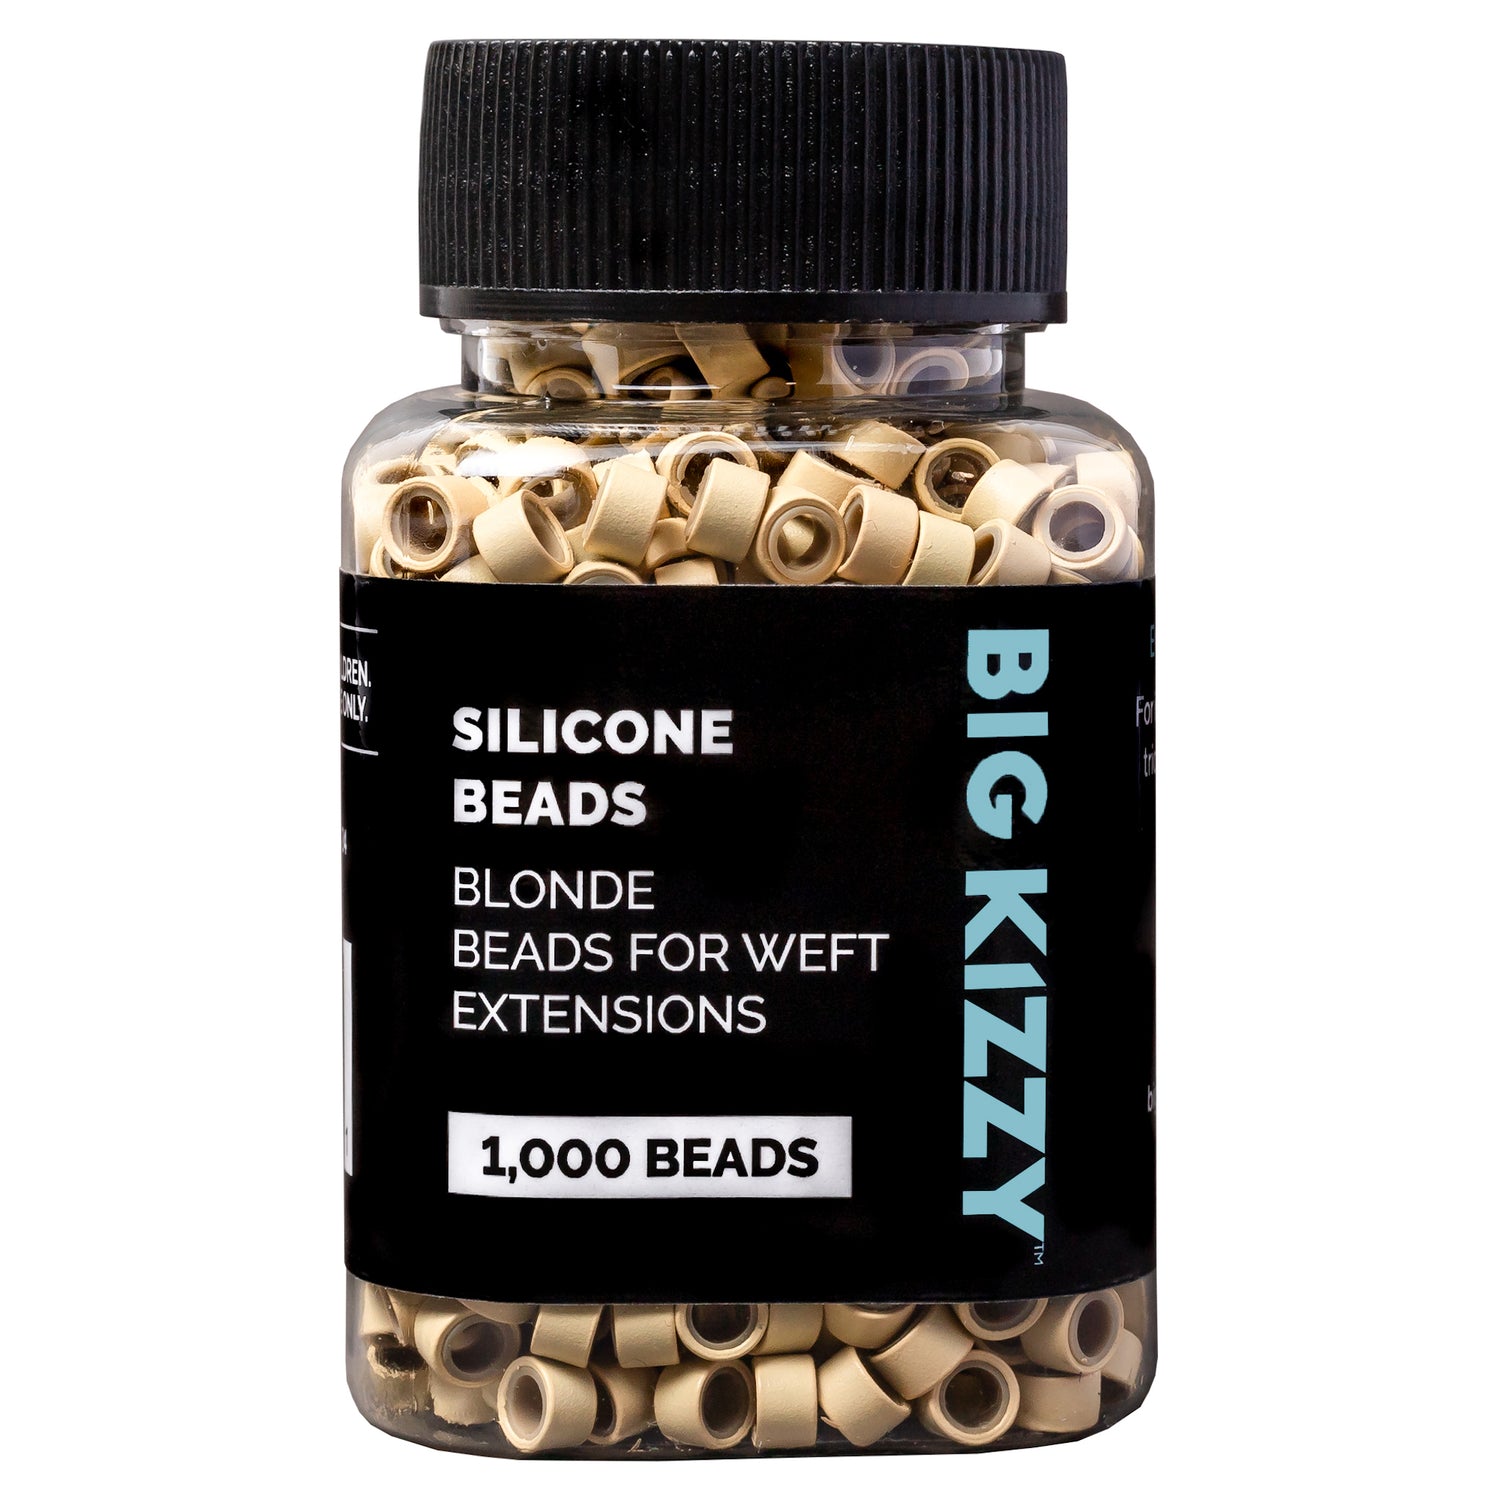 Silicone Beads for Weft Extensions